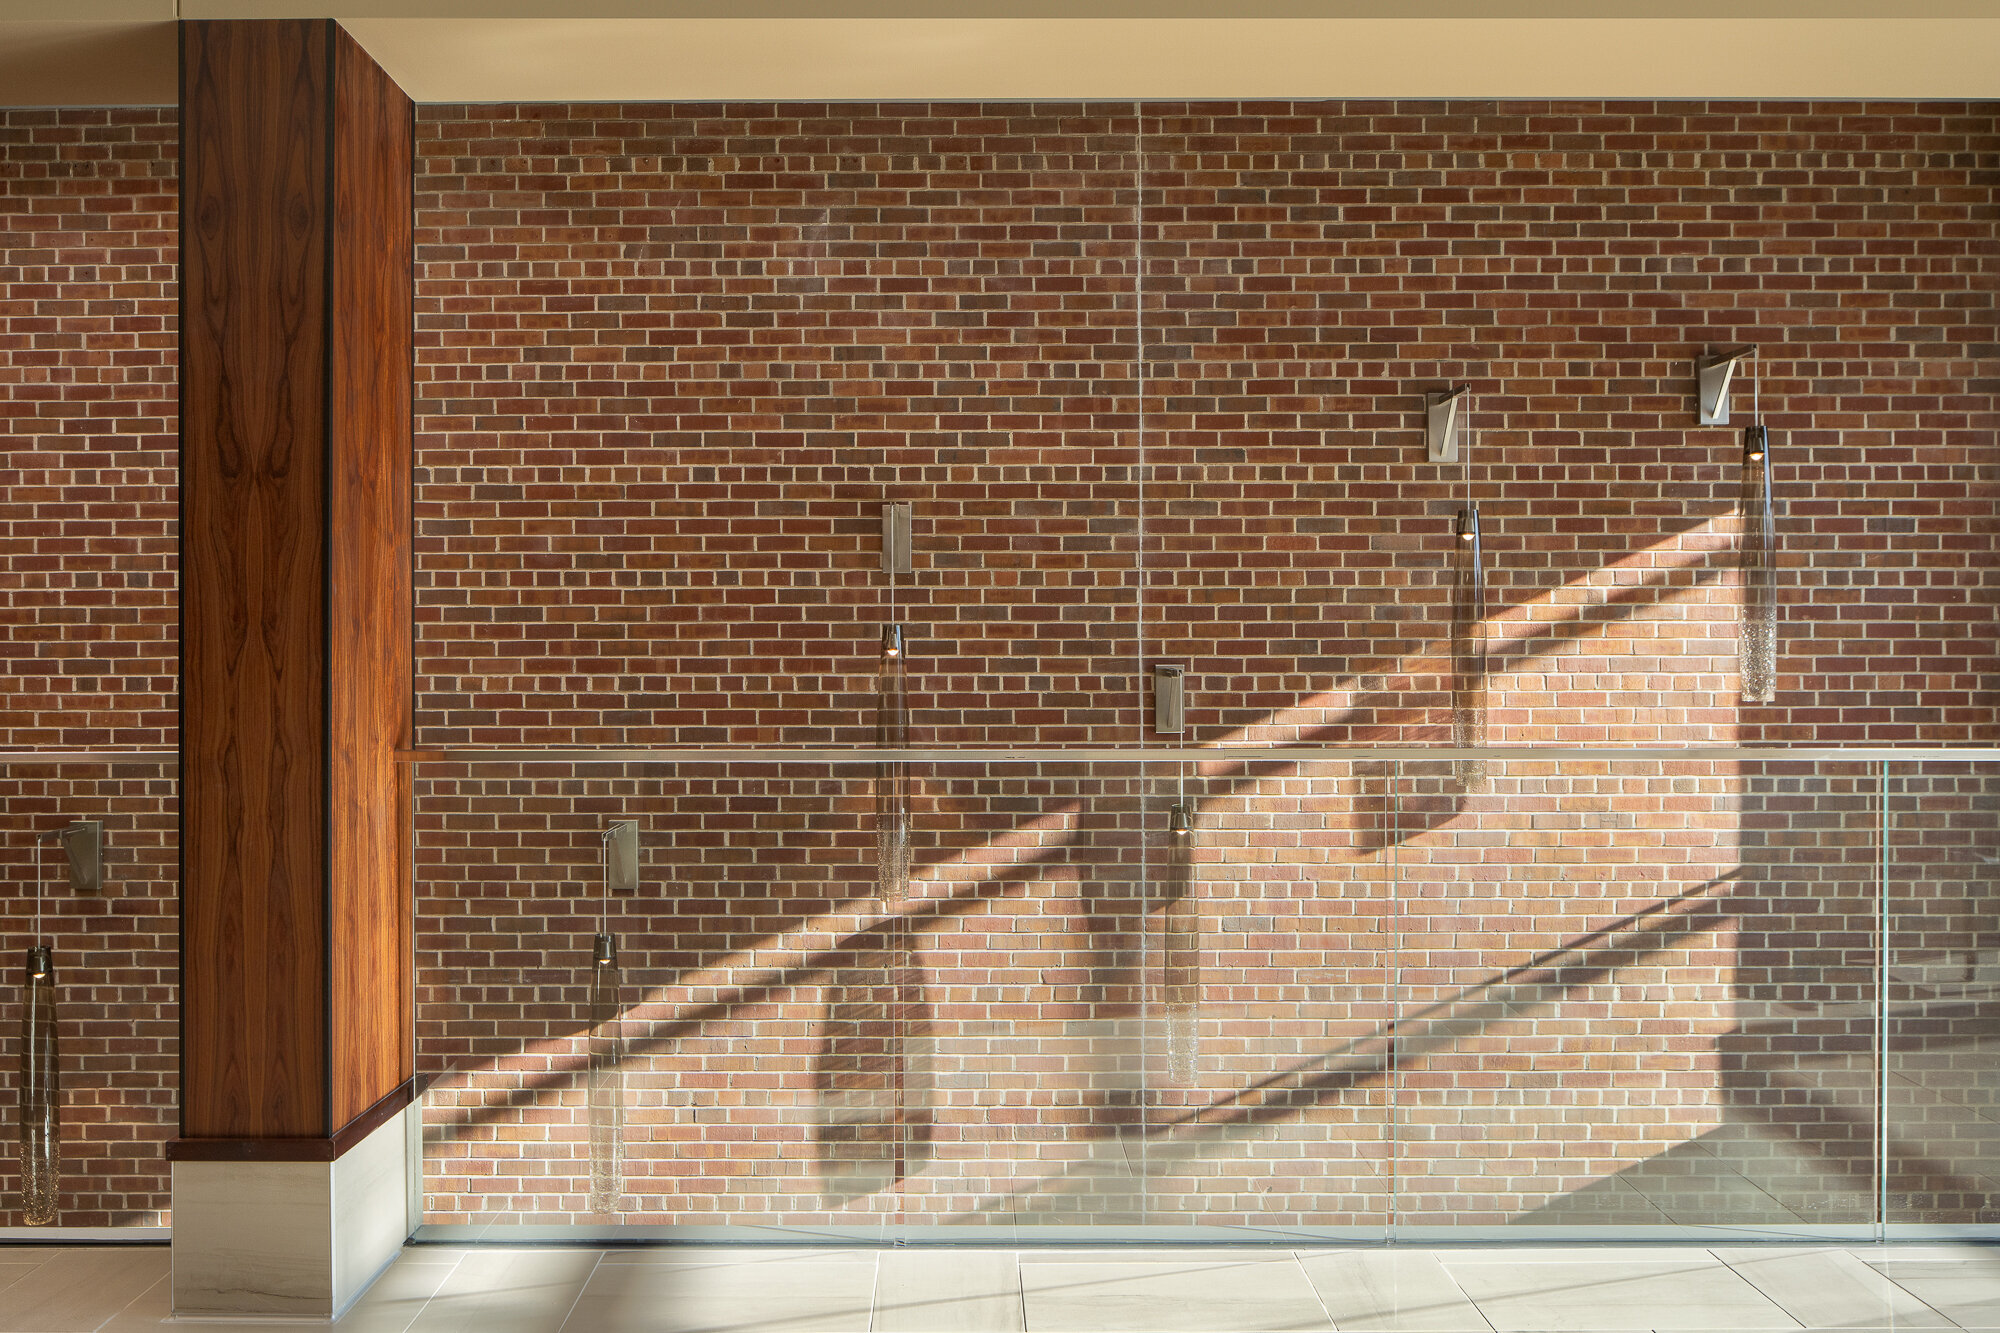 Commercial architectural photography featuring beautiful light casting across a brick wall